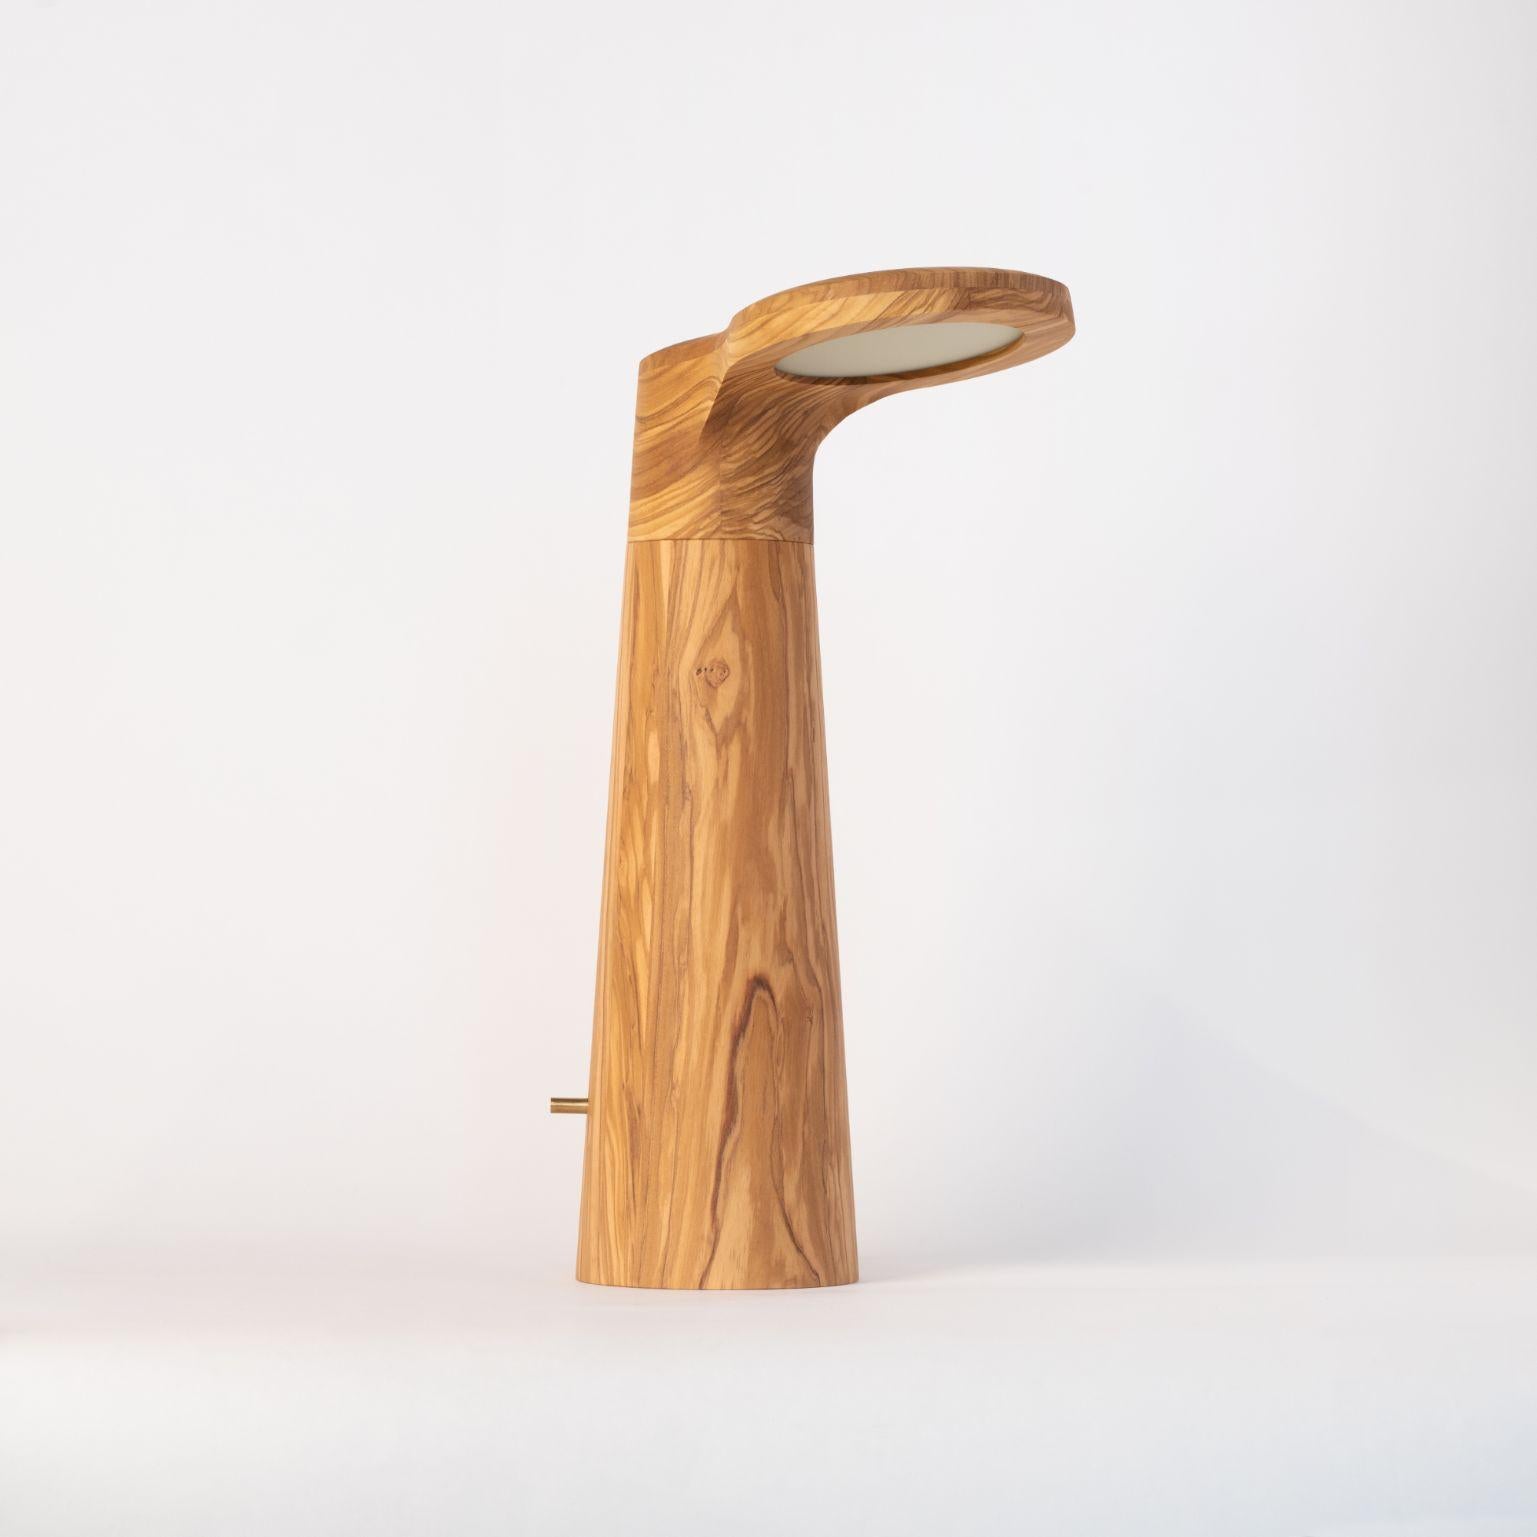 Olive wood - studio light by Isato Prugger
Dimensions: 37 x 22 x 13 cm
Materials: olive wood 
Limited edition of 100

Also available in wenge wood, canaletto walnut, padouk, oak, white ash. All our lamps can be wired according to each country.